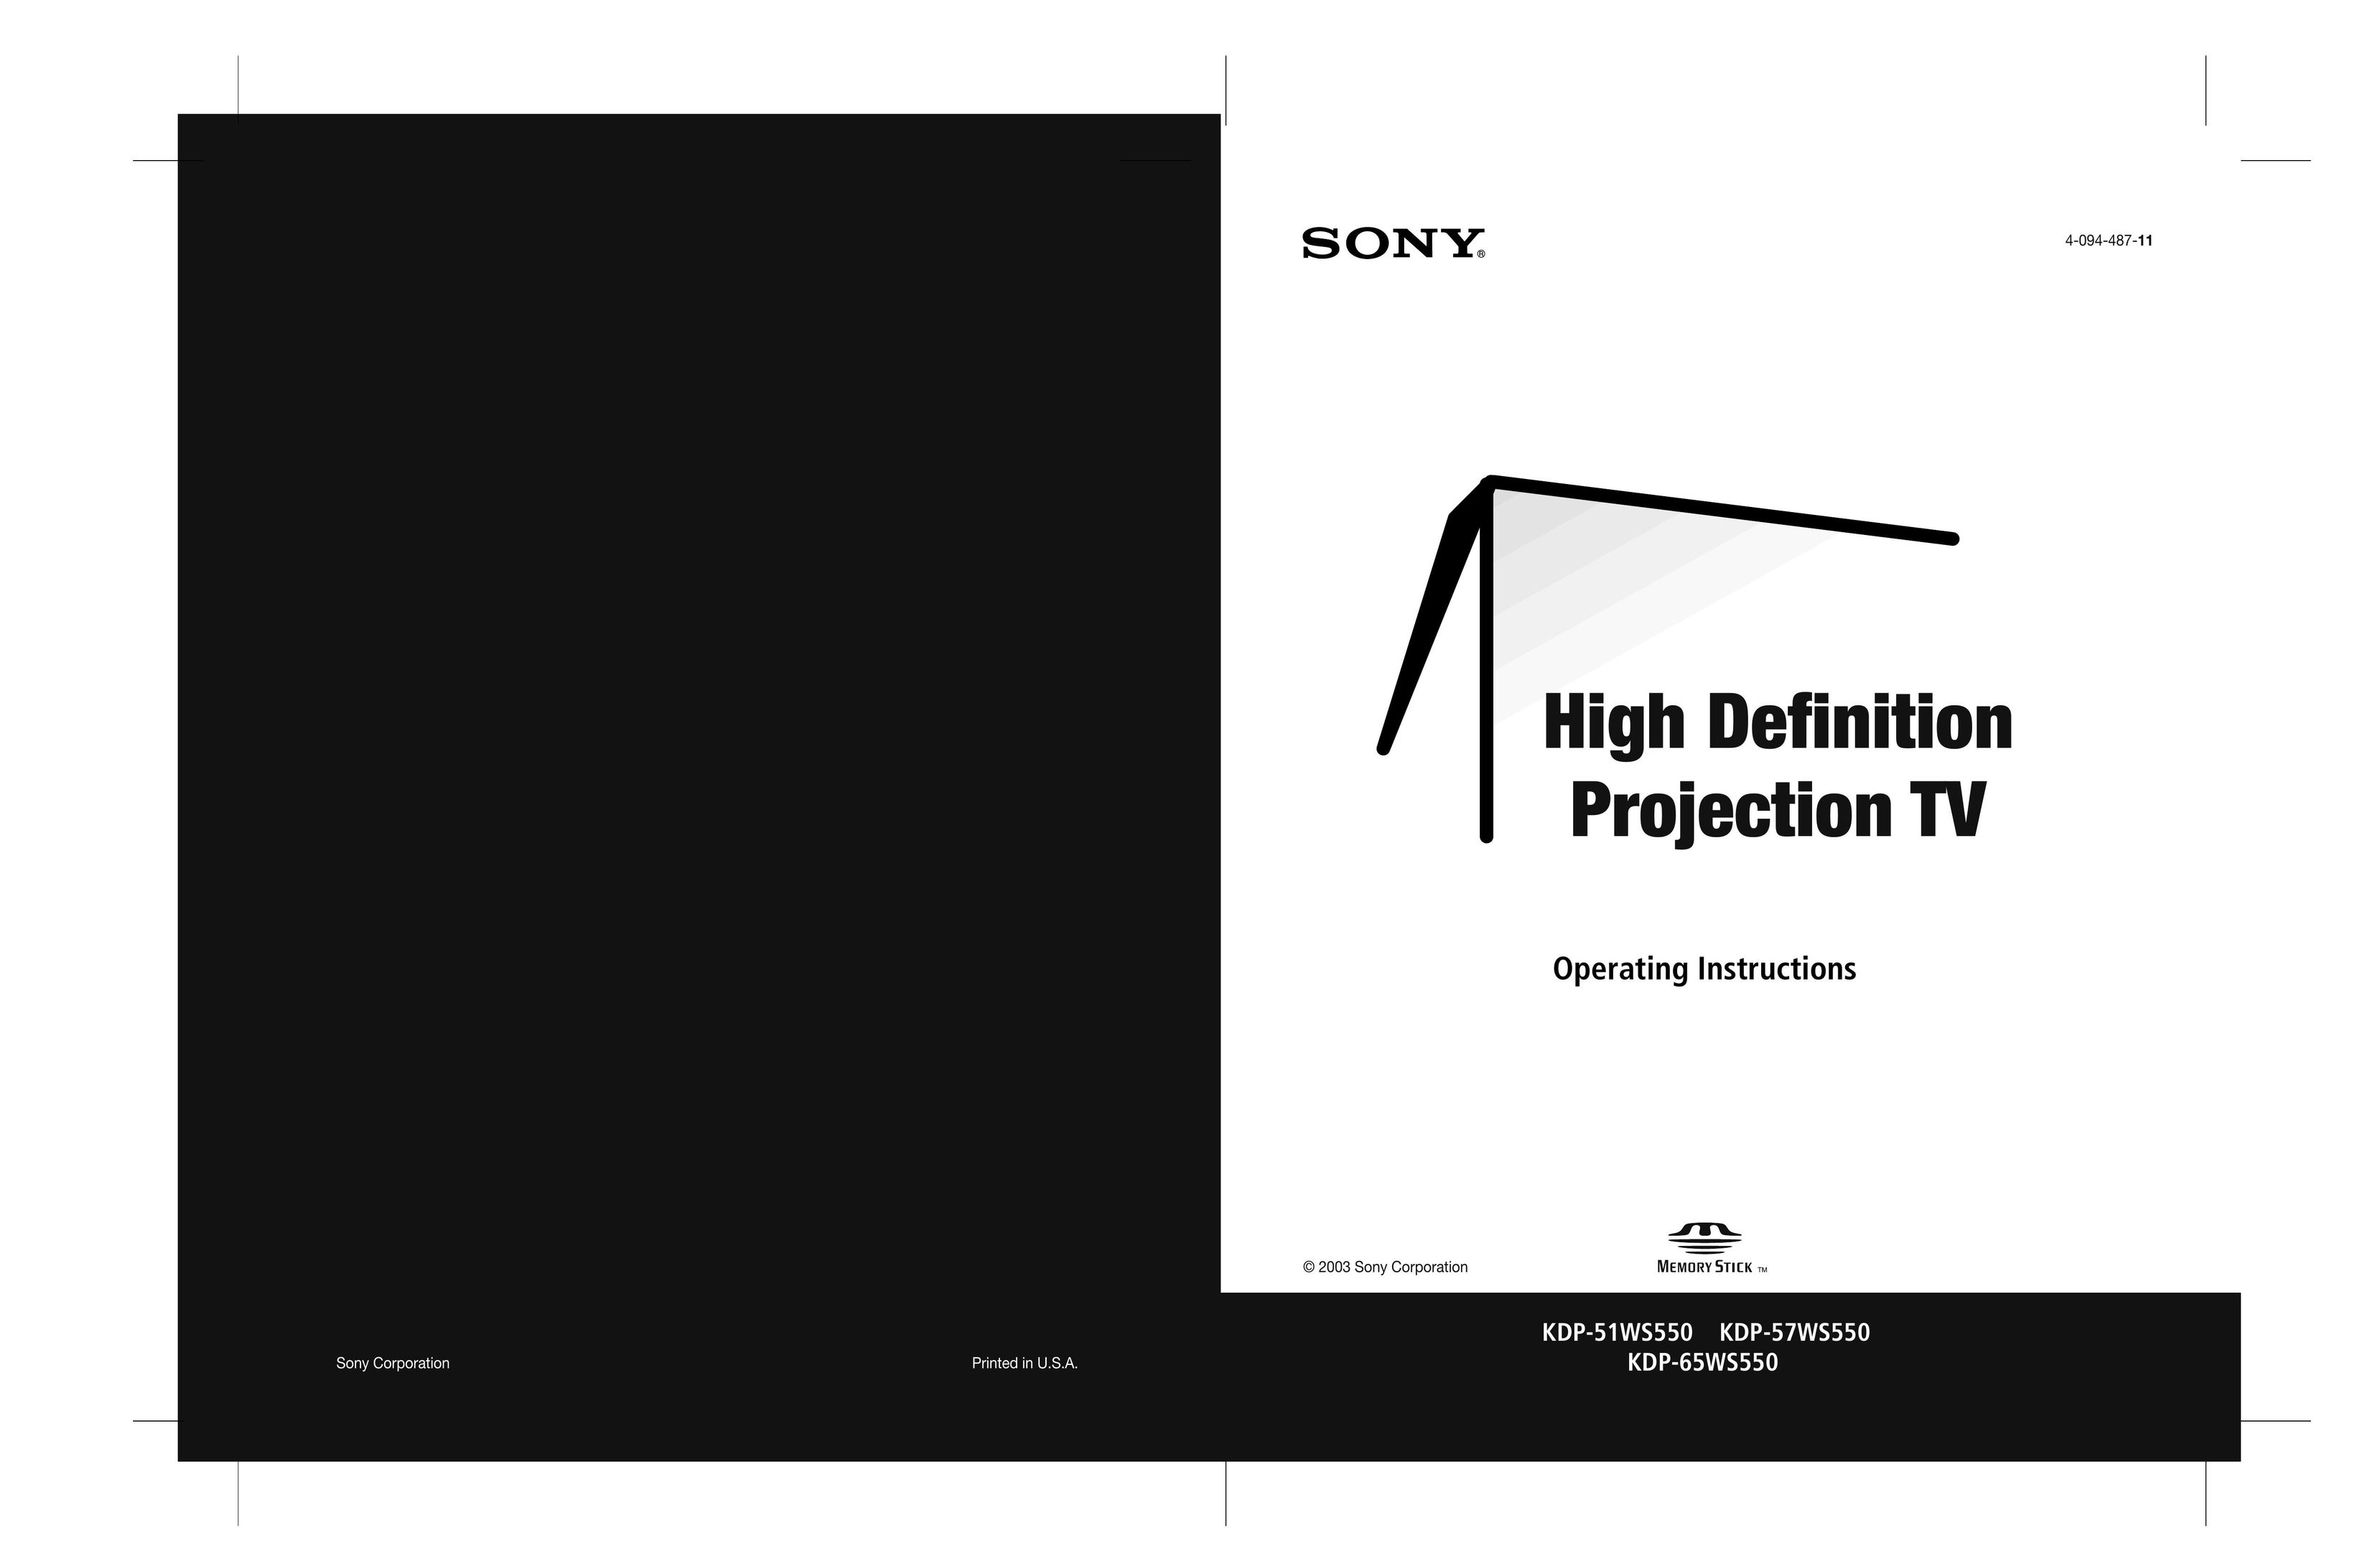 Sony KDP-57W5550 Projection Television User Manual